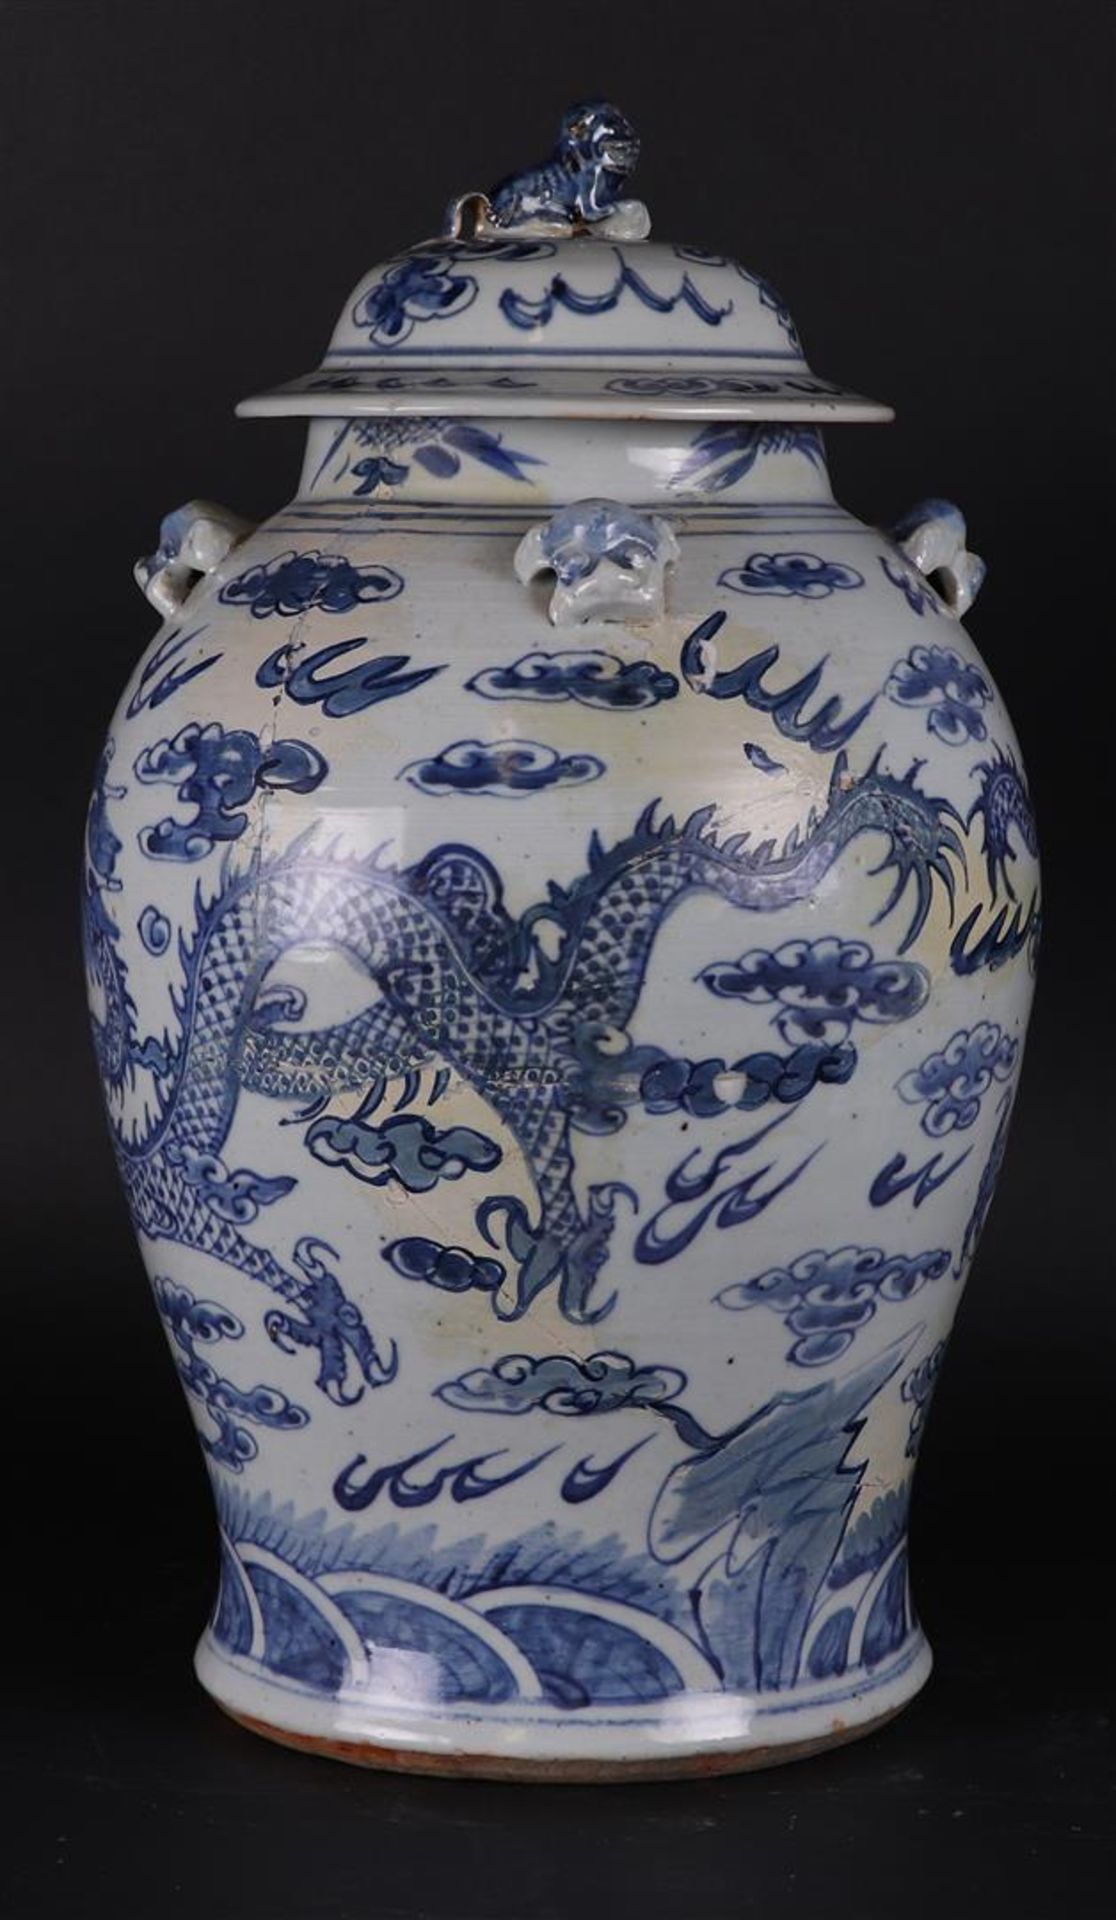 A large porcelain lidded vase decorated with dragons. China, 19th century. - Image 3 of 6